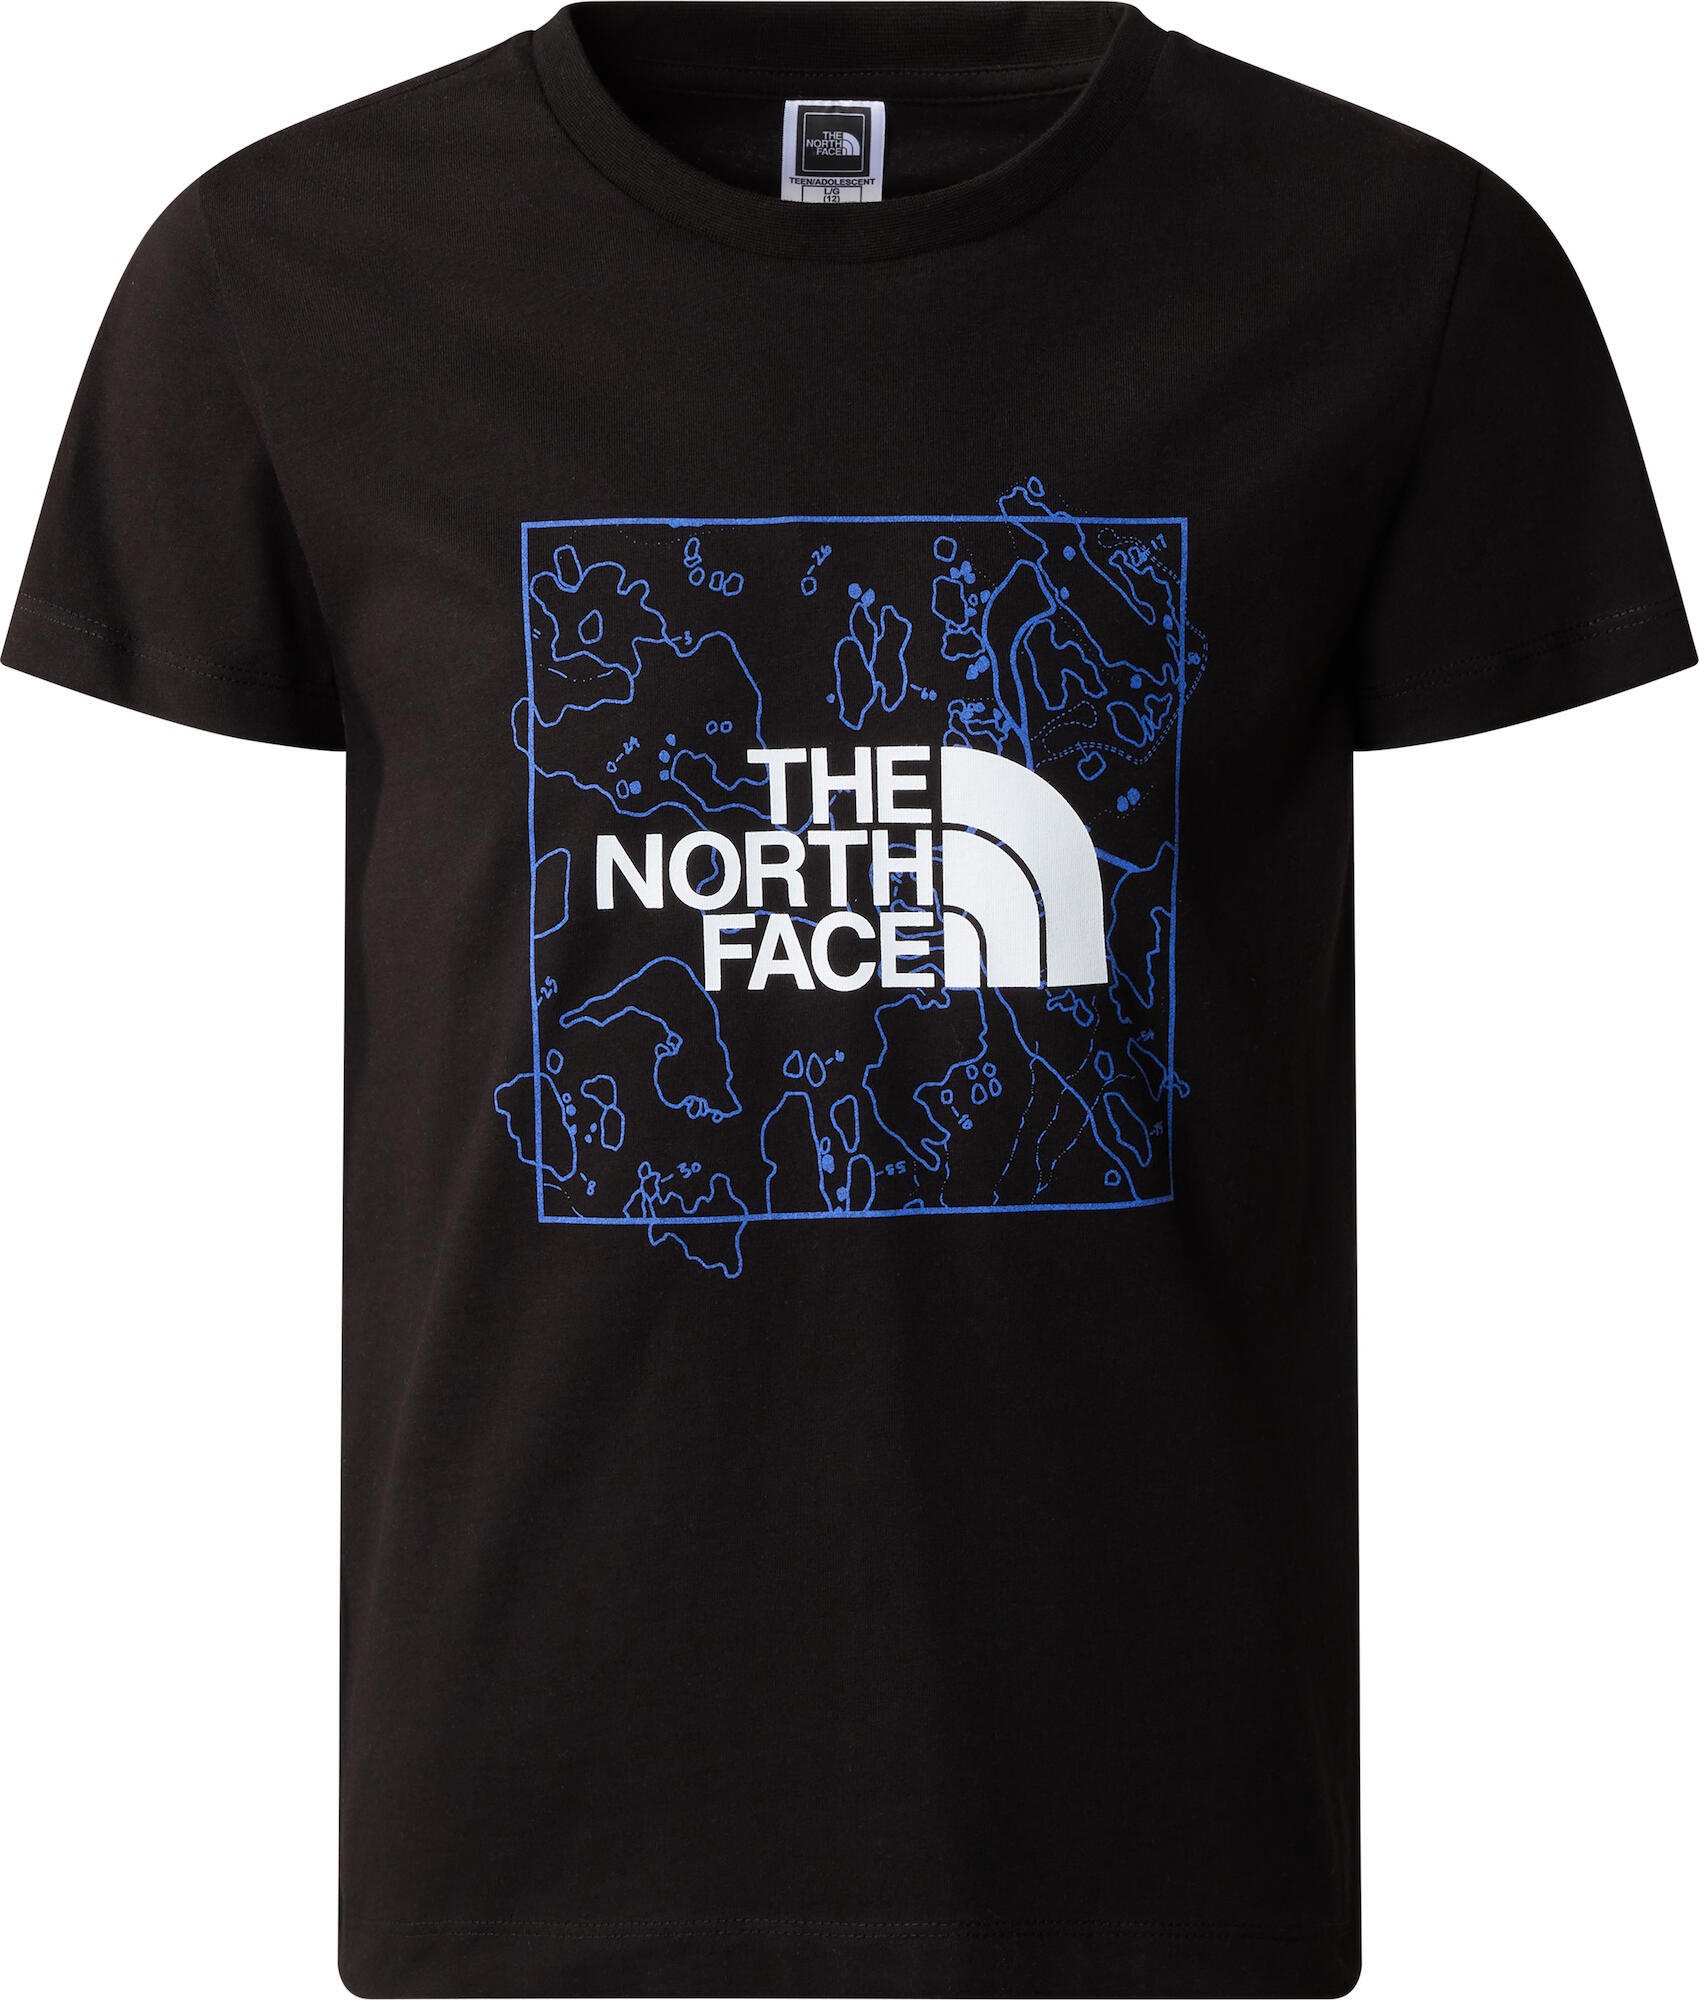 The North Face Y NEW Short Sleeve Graphic Tee tnf black/solar blue (TMI) L